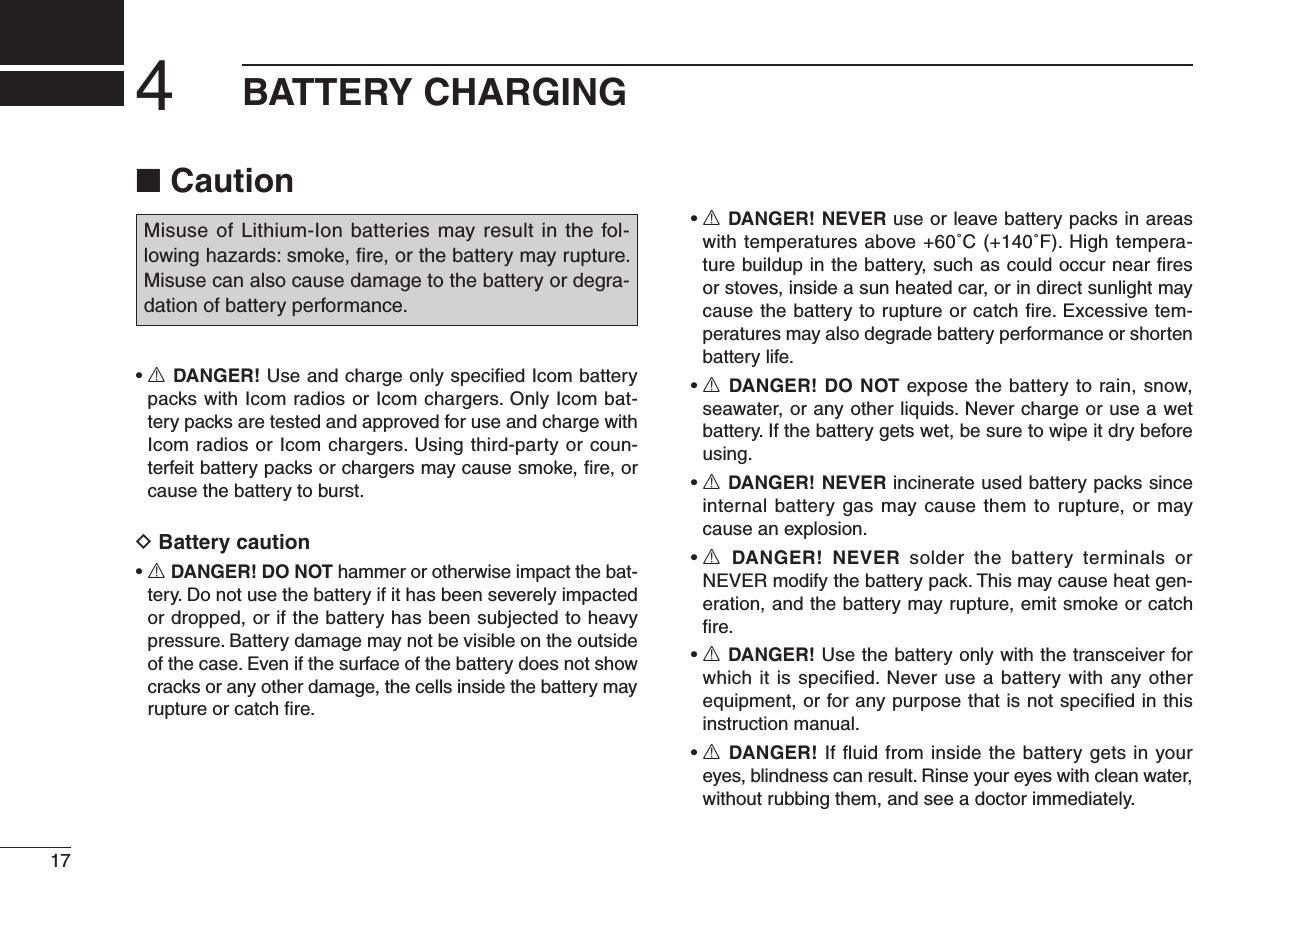 ■ Caution•  R DANGER! Use and charge only speciﬁed Icom battery packs with Icom radios or Icom chargers. Only Icom bat-tery packs are tested and approved for use and charge with Icom radios or Icom chargers. Using third-party or coun-terfeit battery packs or chargers may cause smoke, ﬁre, or cause the battery to burst.D Battery caution•  R DANGER! DO NOT hammer or otherwise impact the bat-tery. Do not use the battery if it has been severely impacted or dropped, or if the battery has been subjected to heavy pressure. Battery damage may not be visible on the outside of the case. Even if the surface of the battery does not show cracks or any other damage, the cells inside the battery may rupture or catch ﬁre.•  R DANGER! NEVER use or leave battery packs in areas with temperatures above +60˚C (+140˚F). High tempera-ture buildup in the battery, such as could occur near ﬁres or stoves, inside a sun heated car, or in direct sunlight may cause the battery to rupture or catch ﬁre. Excessive tem-peratures may also degrade battery performance or shorten battery life.•  R DANGER! DO NOT expose the battery to rain, snow, seawater, or any other liquids. Never charge or use a wet battery. If the battery gets wet, be sure to wipe it dry before using.•  R DANGER! NEVER incinerate used battery packs since internal battery gas may cause them to rupture, or may cause an explosion.•  R  DANGER!  NEVER  solder  the  battery  terminals  or NEVER modify the battery pack. This may cause heat gen-eration, and the battery may rupture, emit smoke or catch ﬁre.•  R DANGER! Use the battery only with the transceiver for which it is speciﬁed. Never use a battery with any other equipment, or for any purpose that is not speciﬁed in this instruction manual.•  R DANGER! If ﬂuid from inside the battery gets in your eyes, blindness can result. Rinse your eyes with clean water, without rubbing them, and see a doctor immediately.174BATTERY CHARGINGMisuse of Lithium-Ion batteries may result in the fol-lowing hazards: smoke, ﬁre, or the battery may rupture. Misuse can also cause damage to the battery or degra-dation of battery performance.